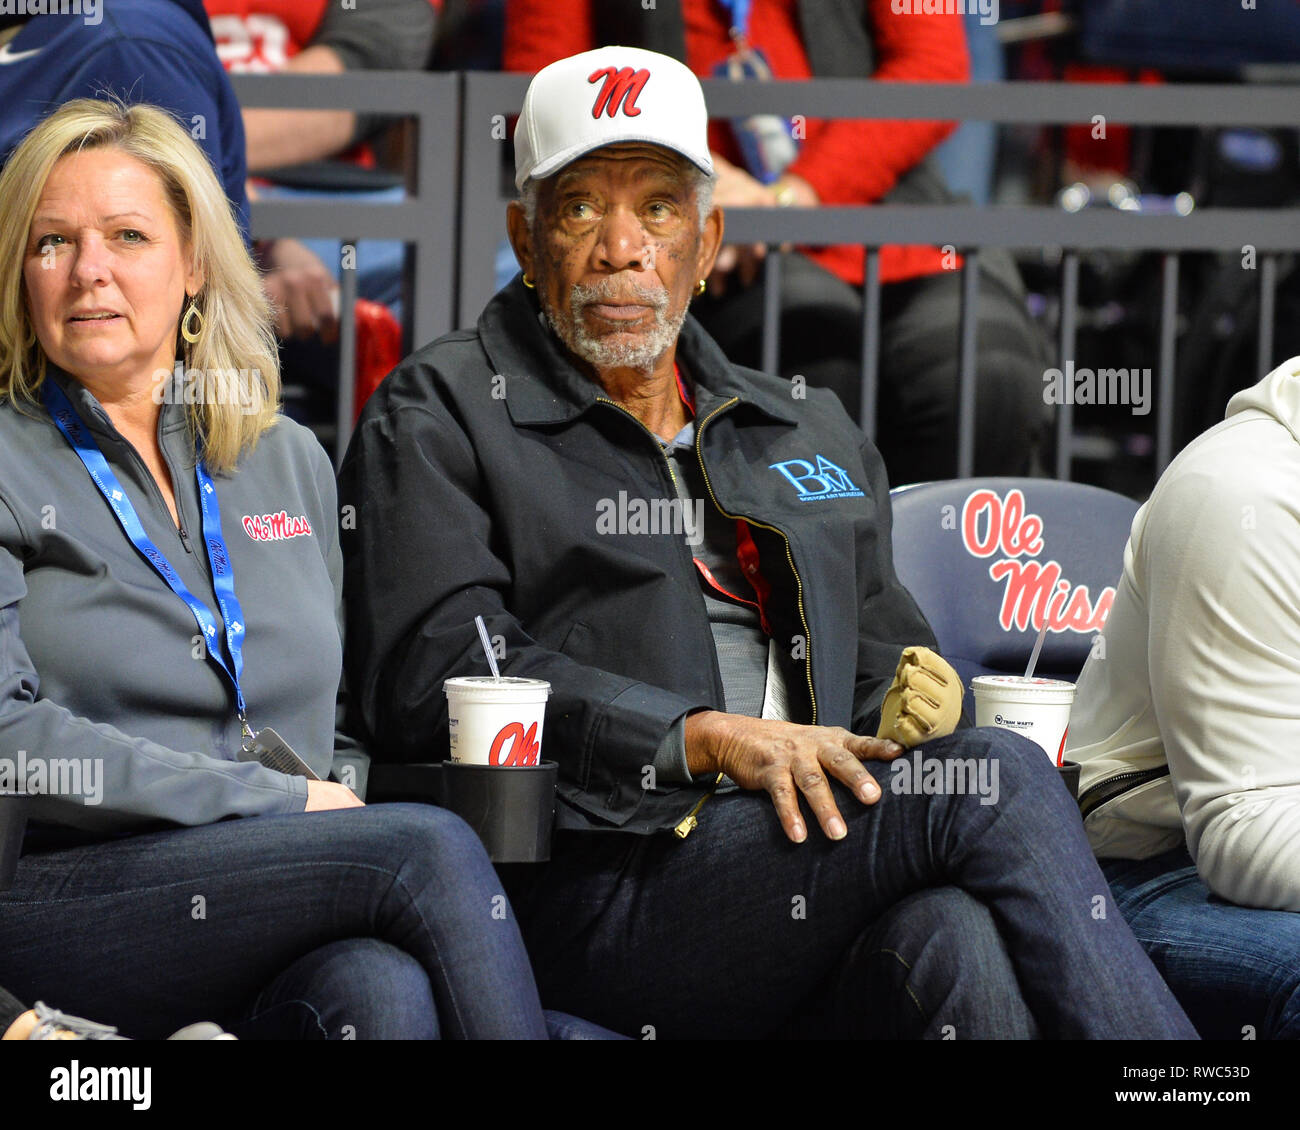 Oxford, MS, USA. 05th Mar, 2019. Actor, producer, and narrator; Morgan Freeman (right) enjoys the NCAA basketball game between the Kentucky Wildcats and the Ole' Miss Rebels at the Pavillion in Oxford, MS. Kentucky defeated Ole' Miss, 80-76. Kevin Langley/Sports South Media/CSM/Alamy Live News Stock Photo